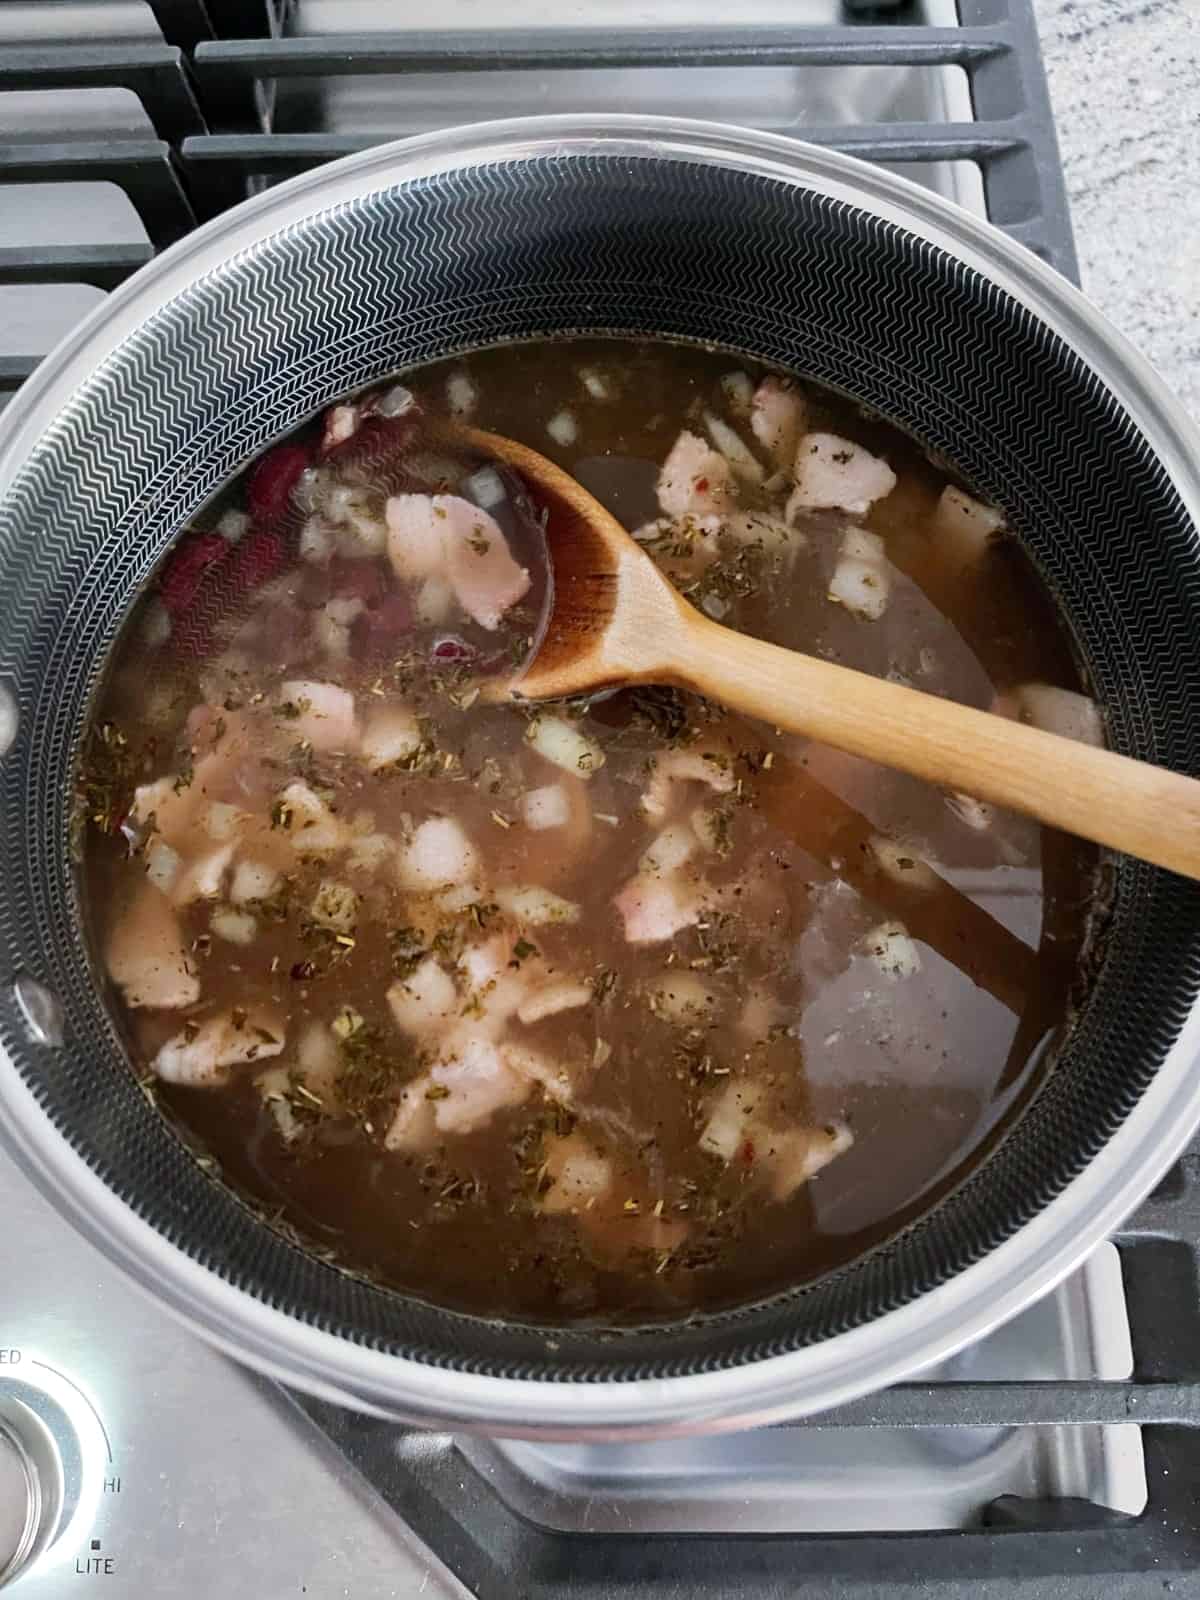 Cooking Jamaican Jerk red beans and rice soup in saucepan on stovetop.